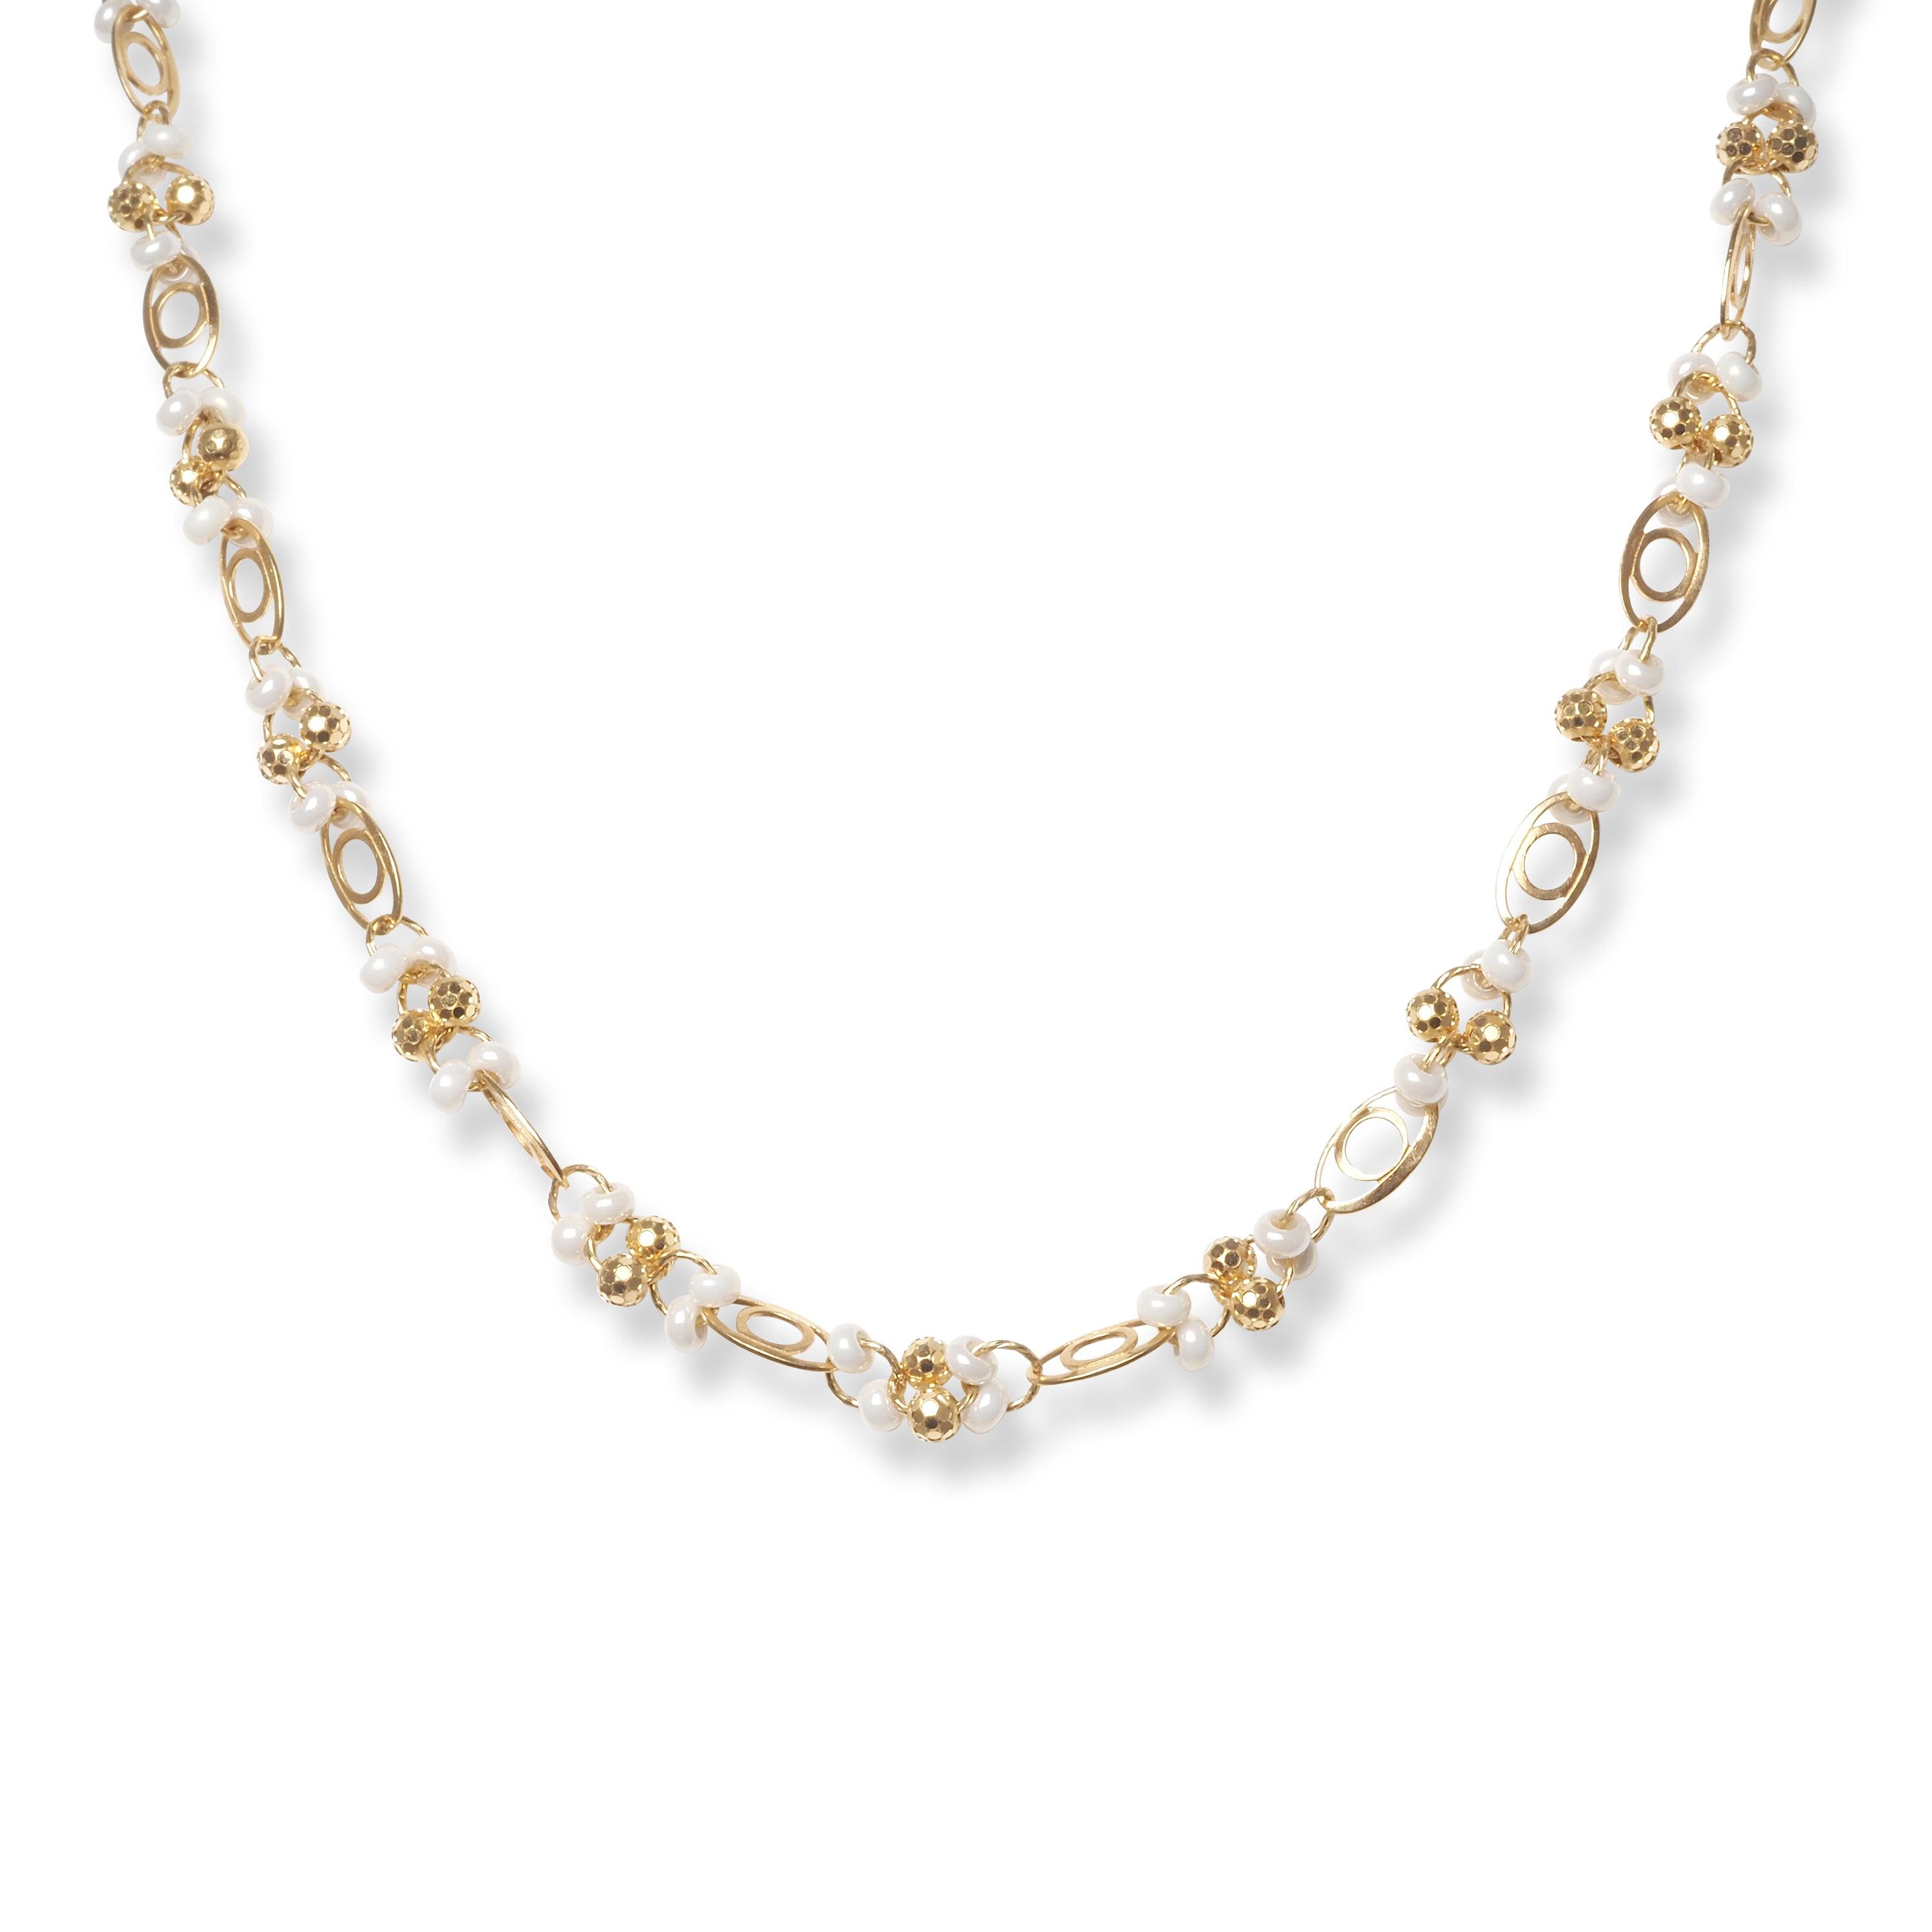 22ct Gold Necklace with Cultured Pearl, Diamond Cut Beads and Lobster Clasp N-7935 - Minar Jewellers